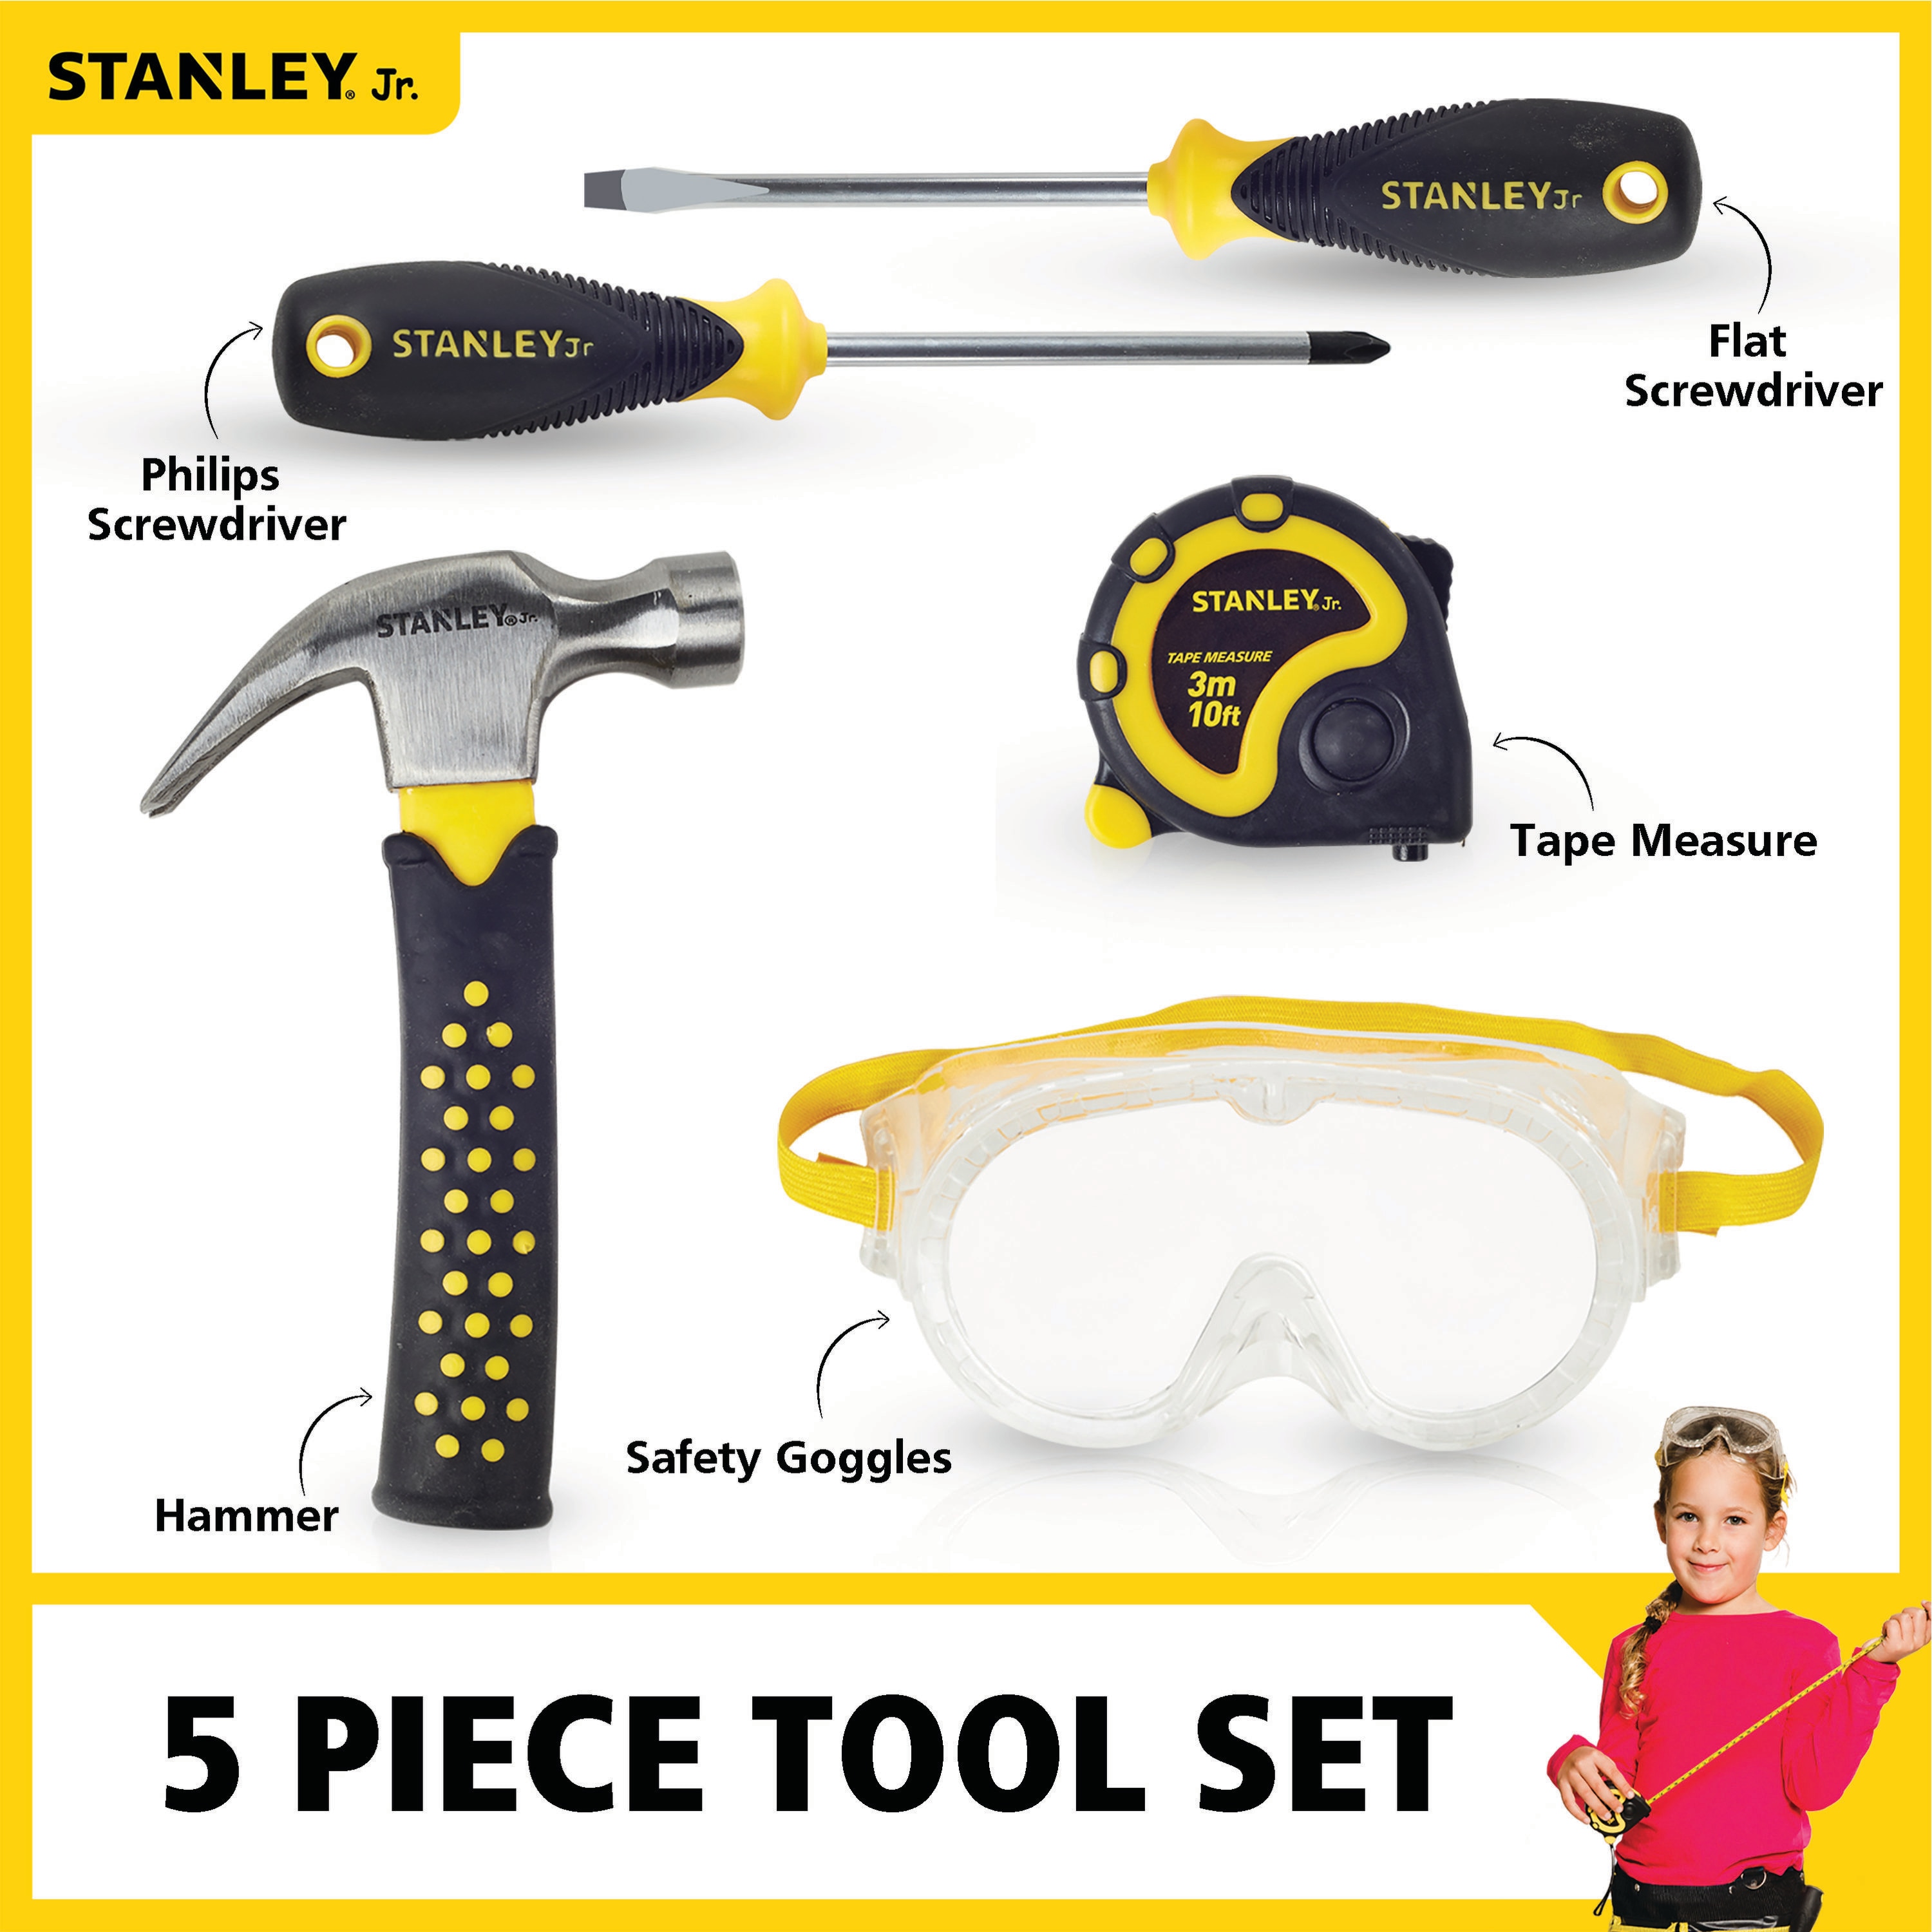 Build and Grow 16-Piece Kid's Tool Kit in the Kids Tool Kits department at